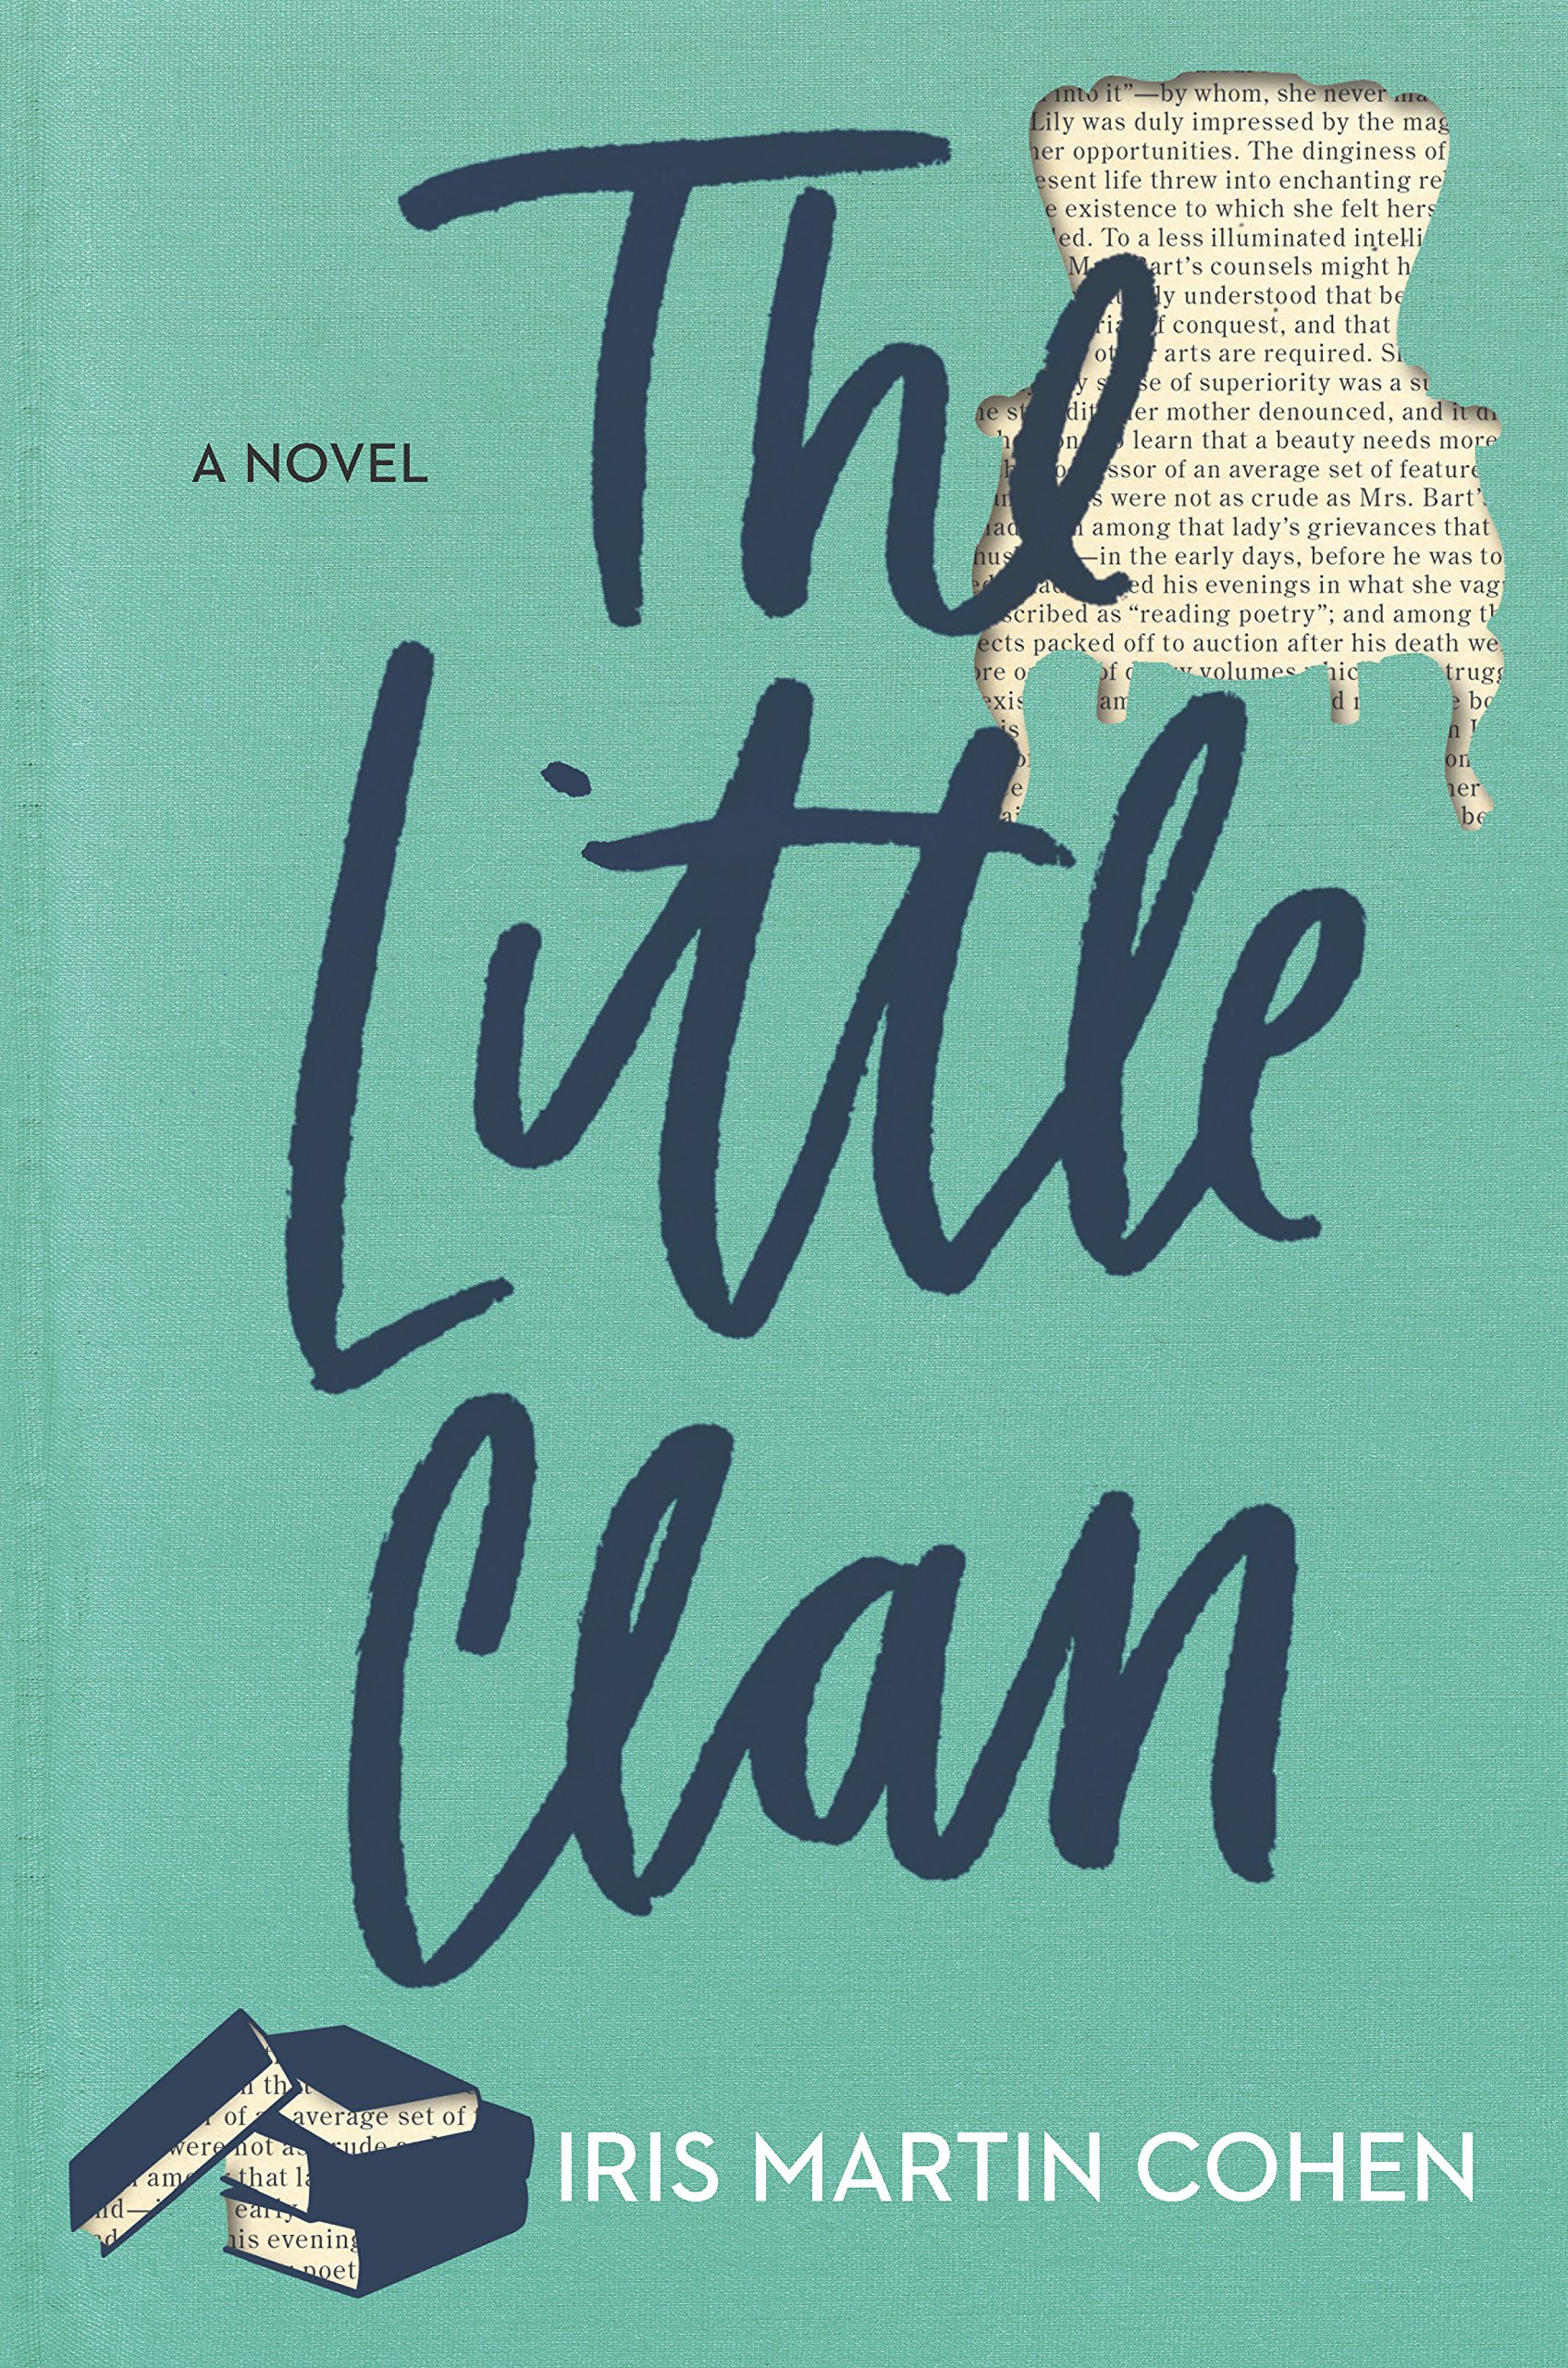 Book cover image for The Little Clan, a novel